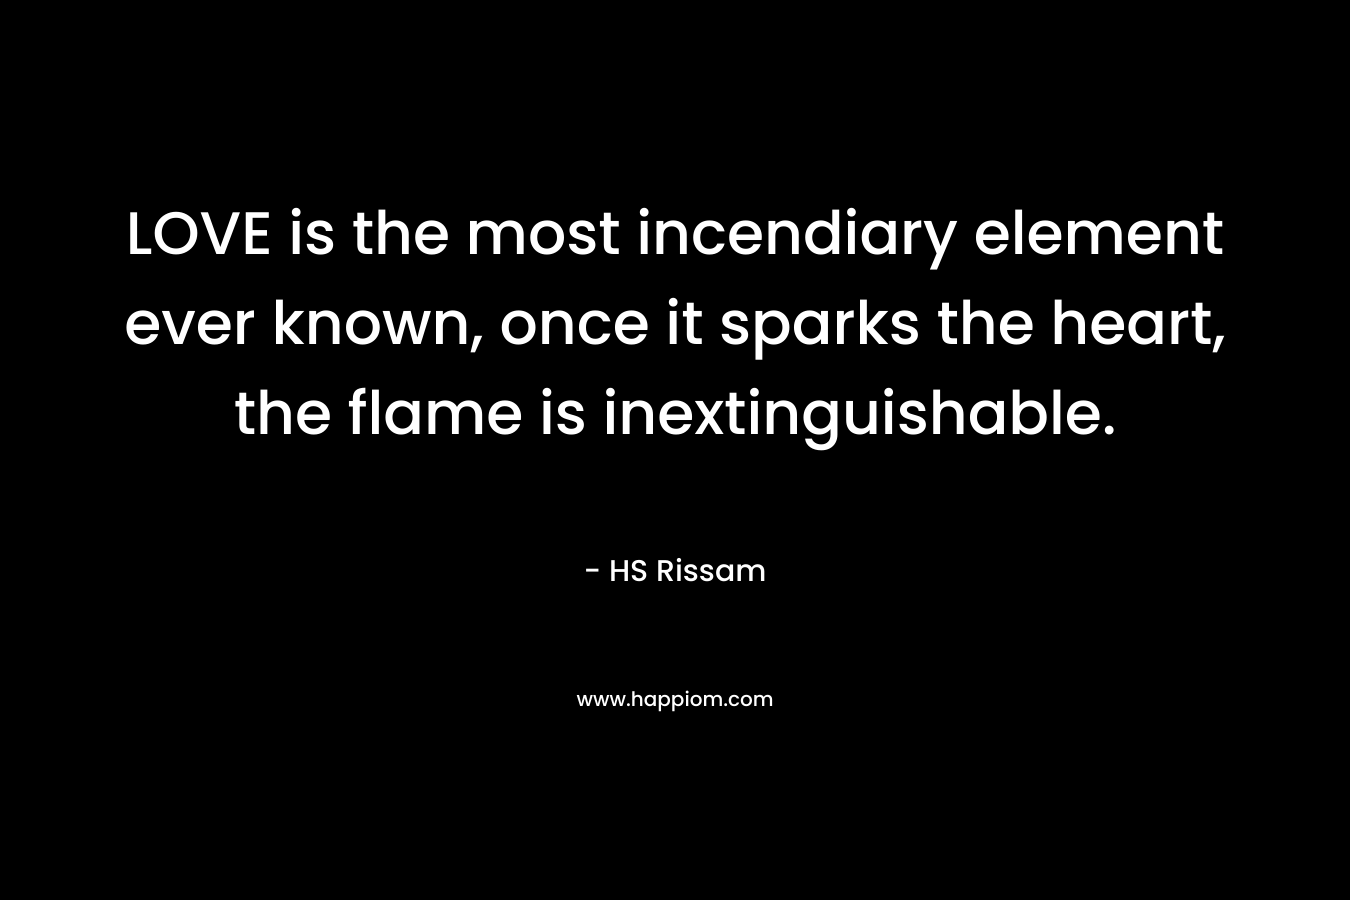 LOVE is the most incendiary element ever known, once it sparks the heart, the flame is inextinguishable.